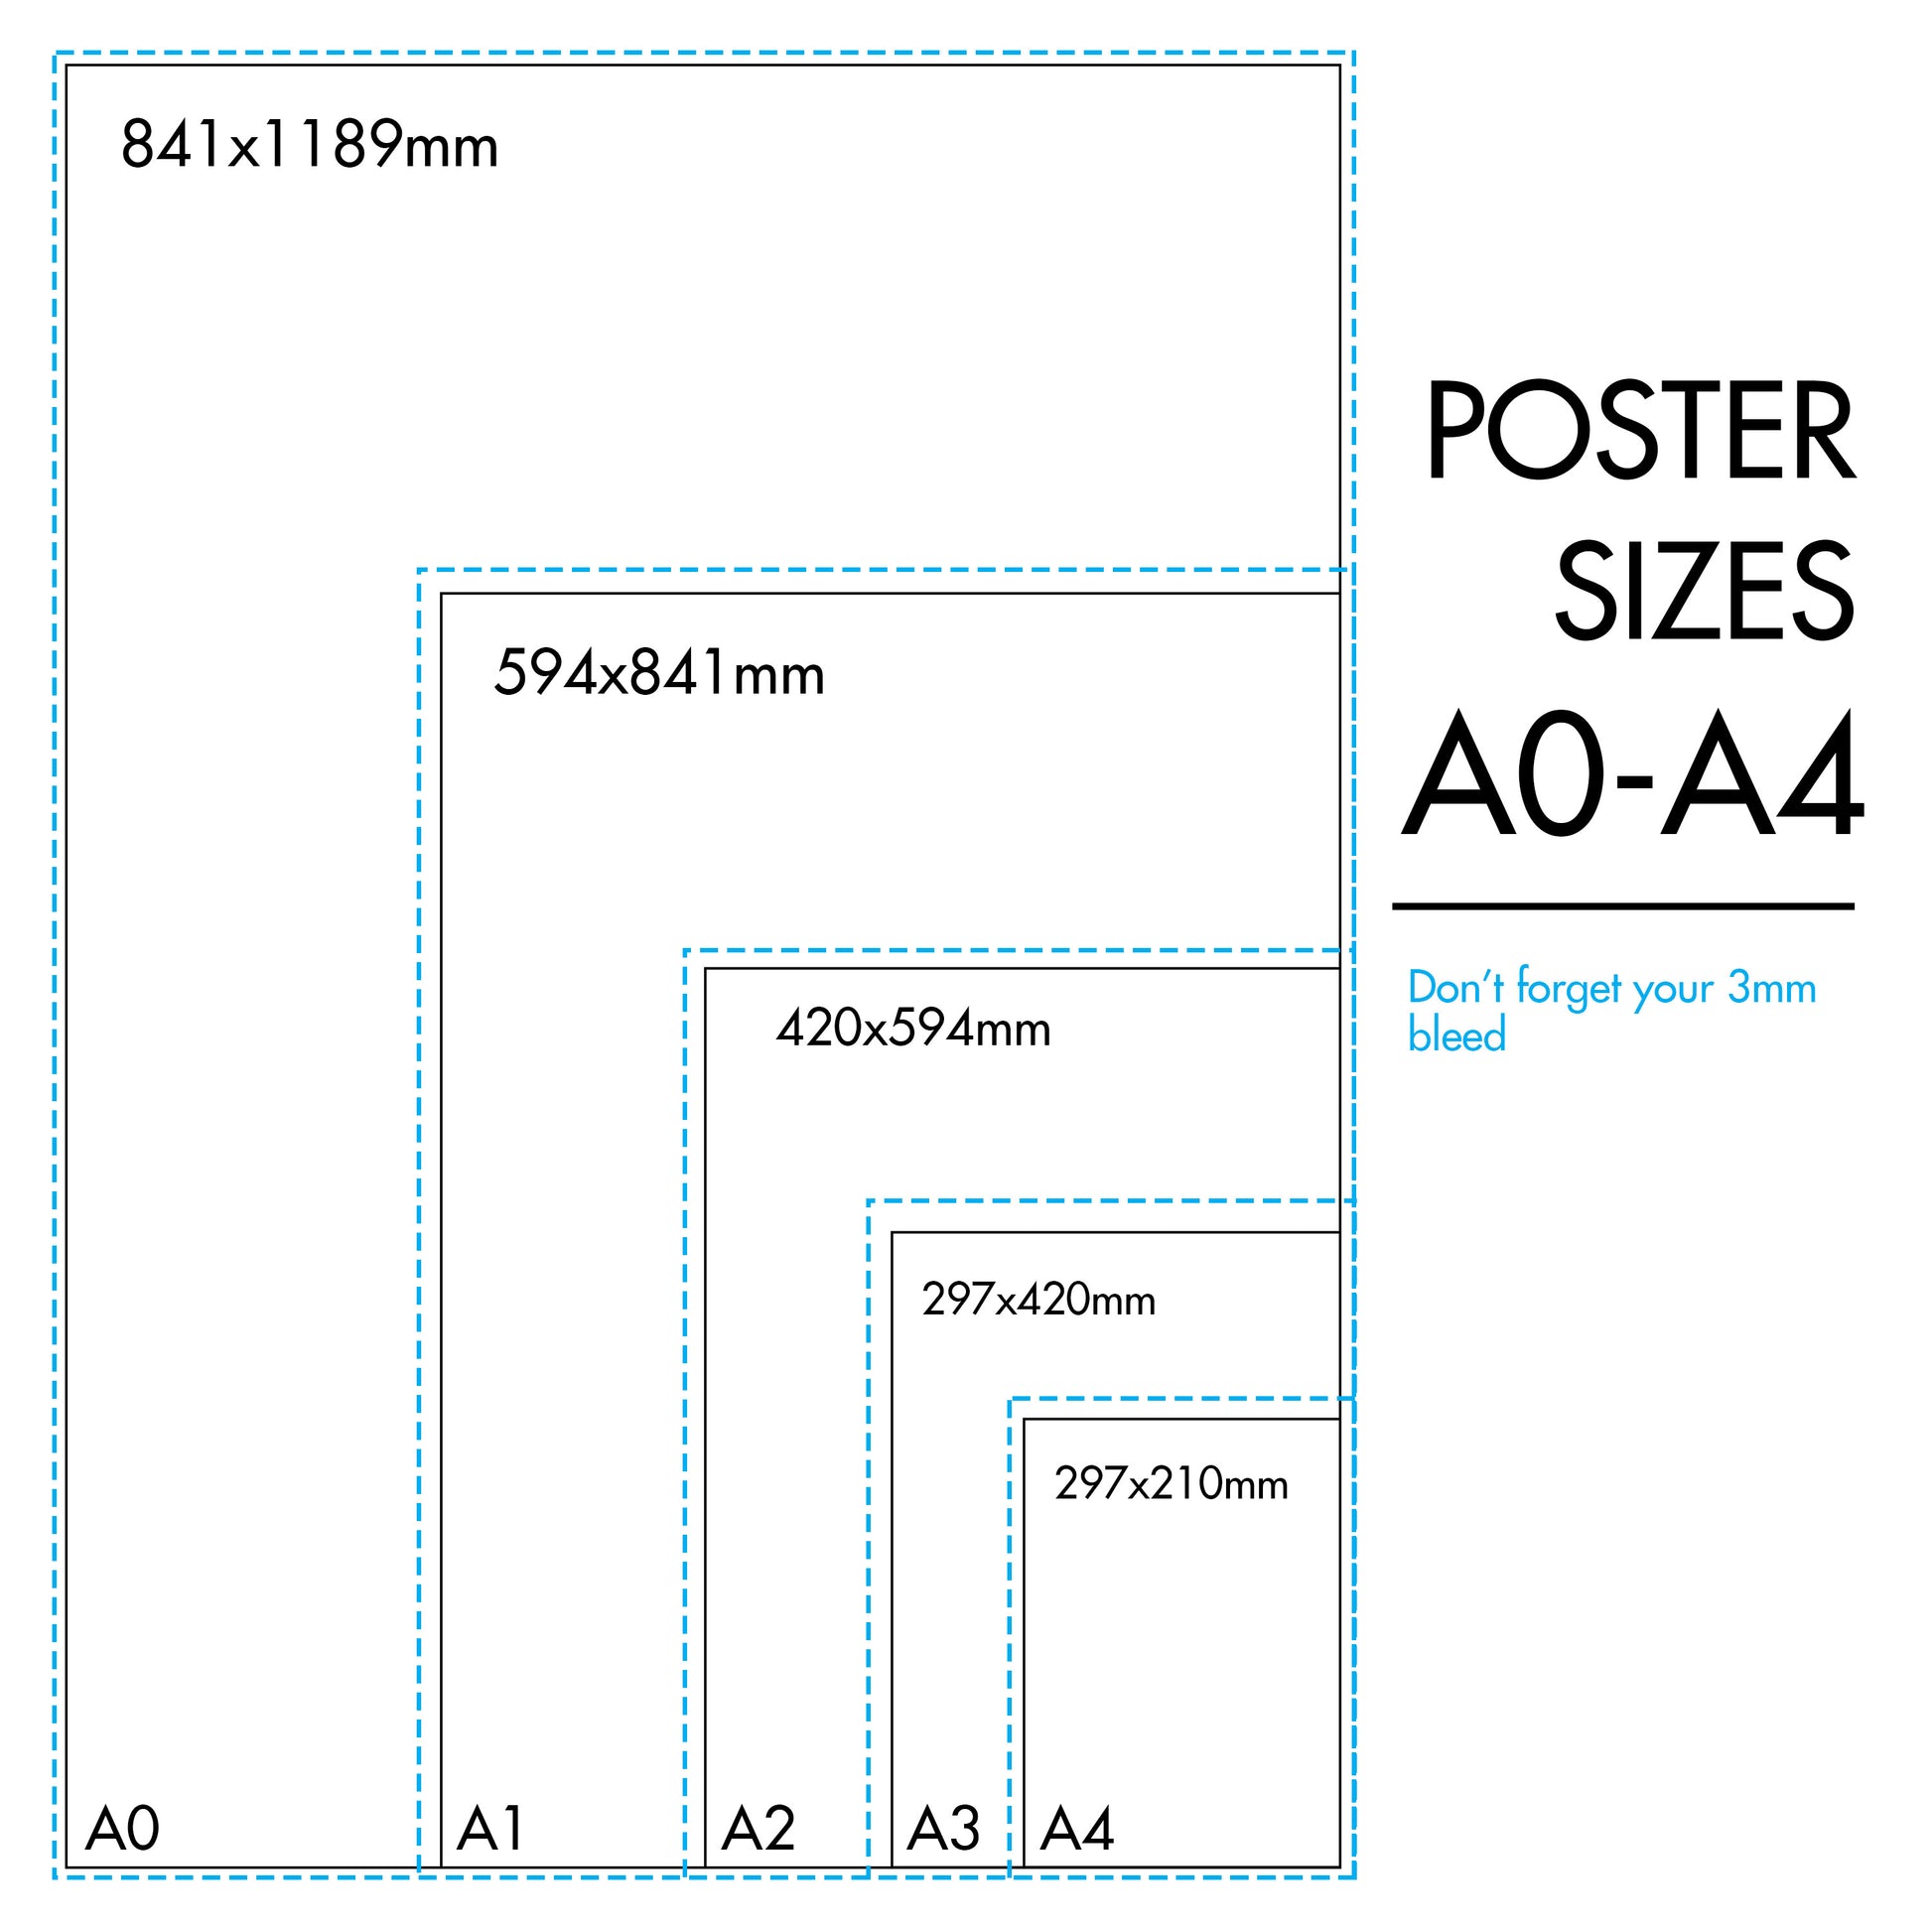 poster sizes a0